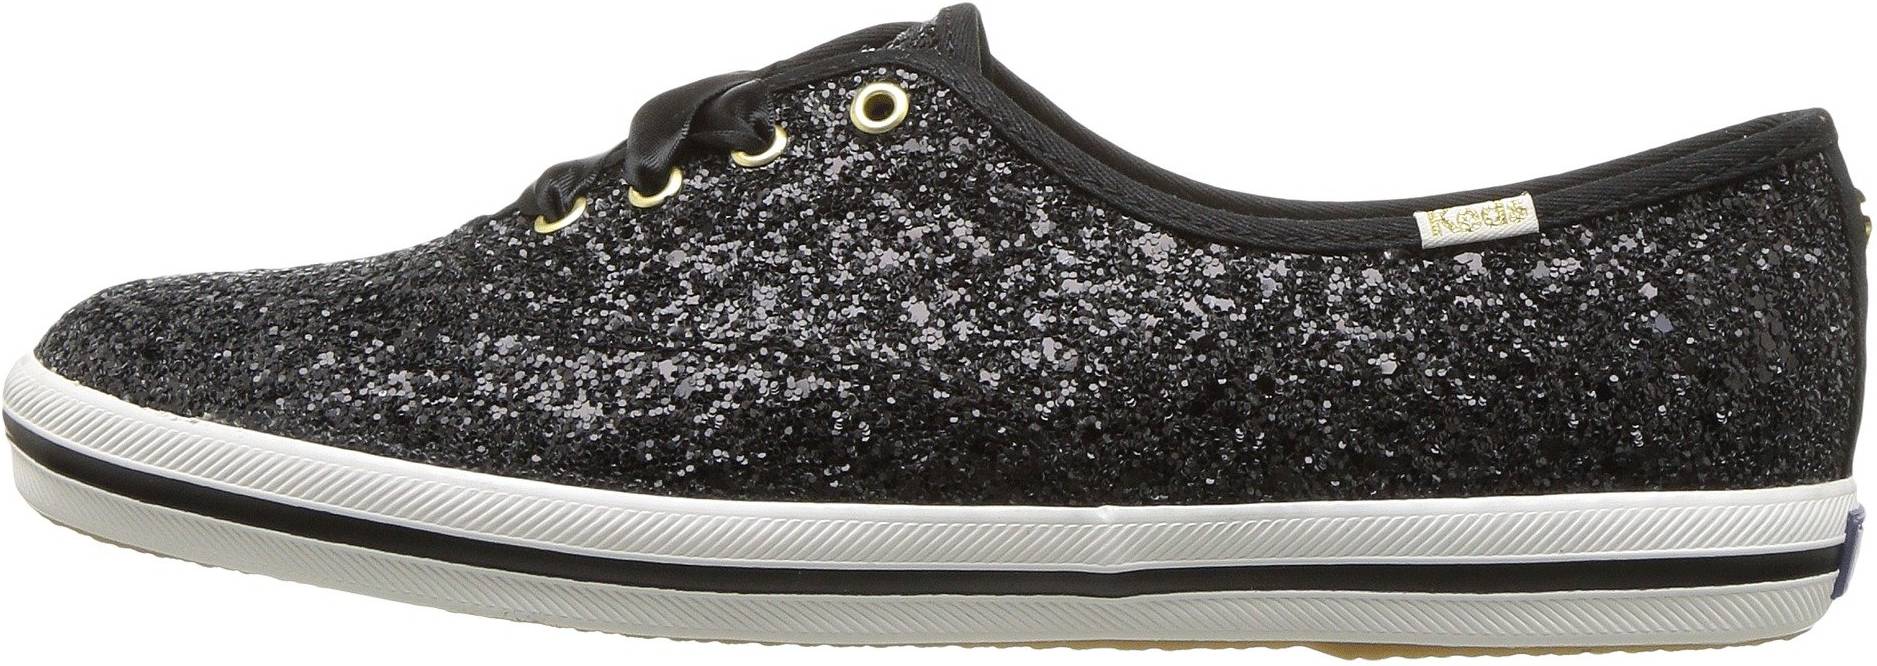 keds x kate spade new york champion pearl leather